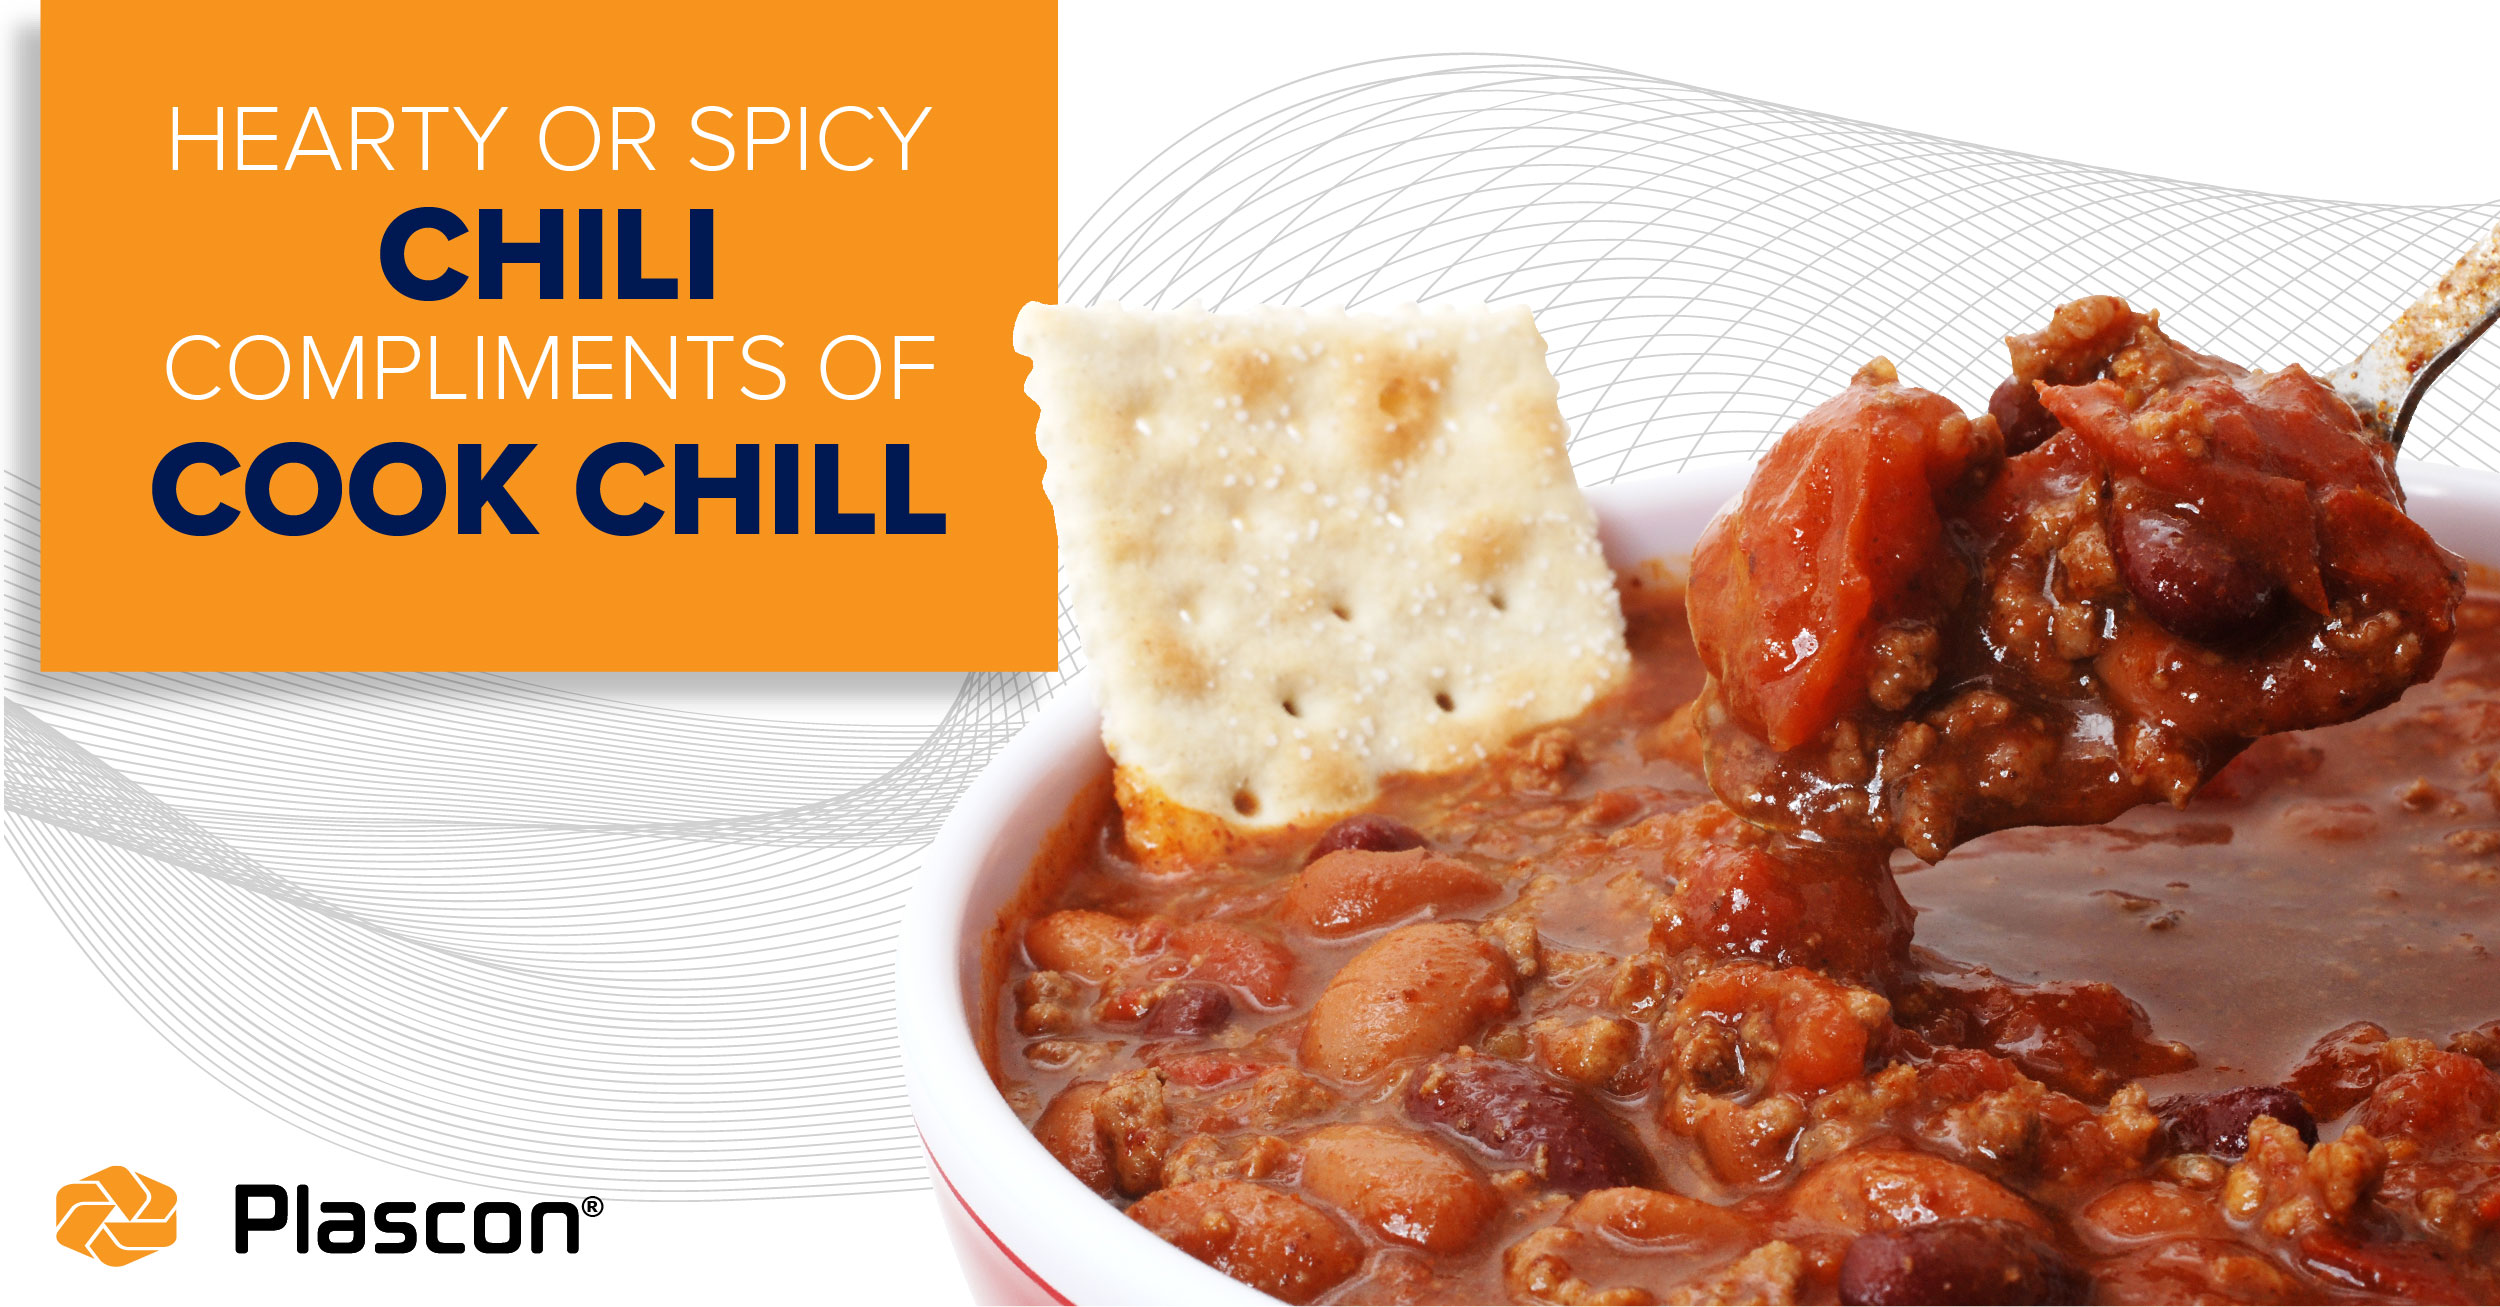 Cook Chill is perfect for making chili